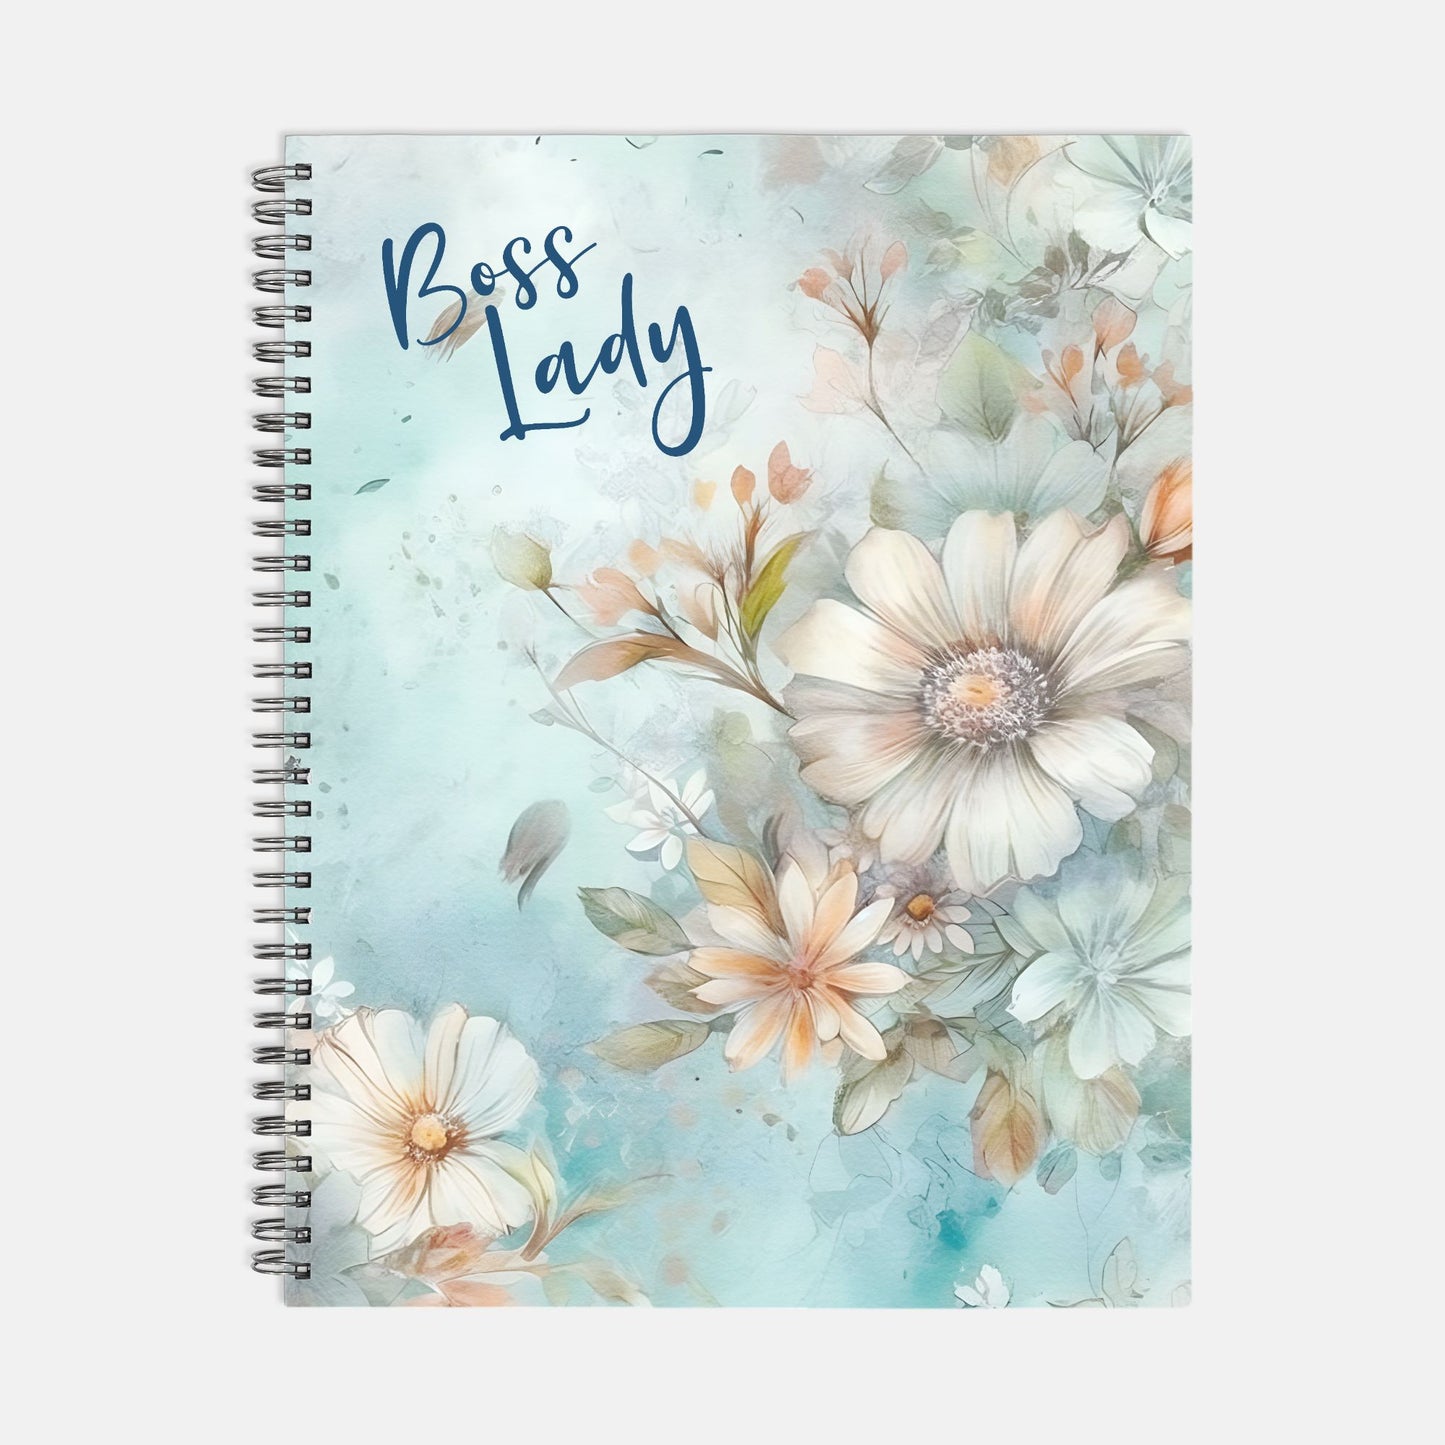 Notebook Softcover Spiral 8.5 x 11 - Boss lady Classy 02